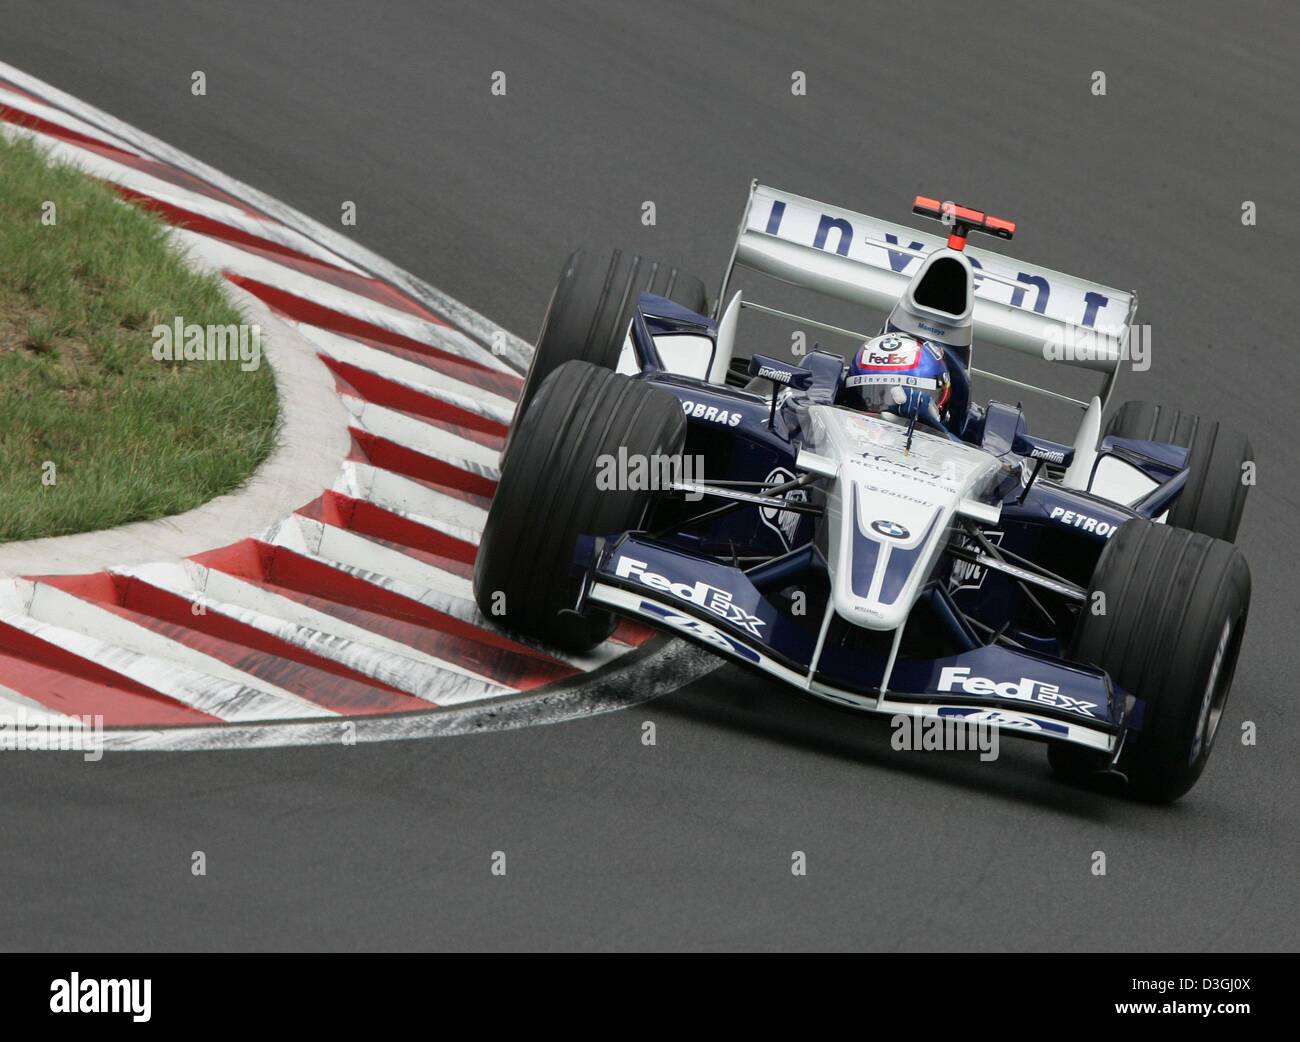 (dpa) - Colombian formula one pilot Juan Pablo Montoya (BMW Williams) races around a bend during the second training on the Hungaroring racing circuit in Budapest, Hungary, 13 August 2004. Montoya finished third in the training. The Hungarian Formula One Grand Prix will be underway on Sunday, 15 August 2004. Stock Photo